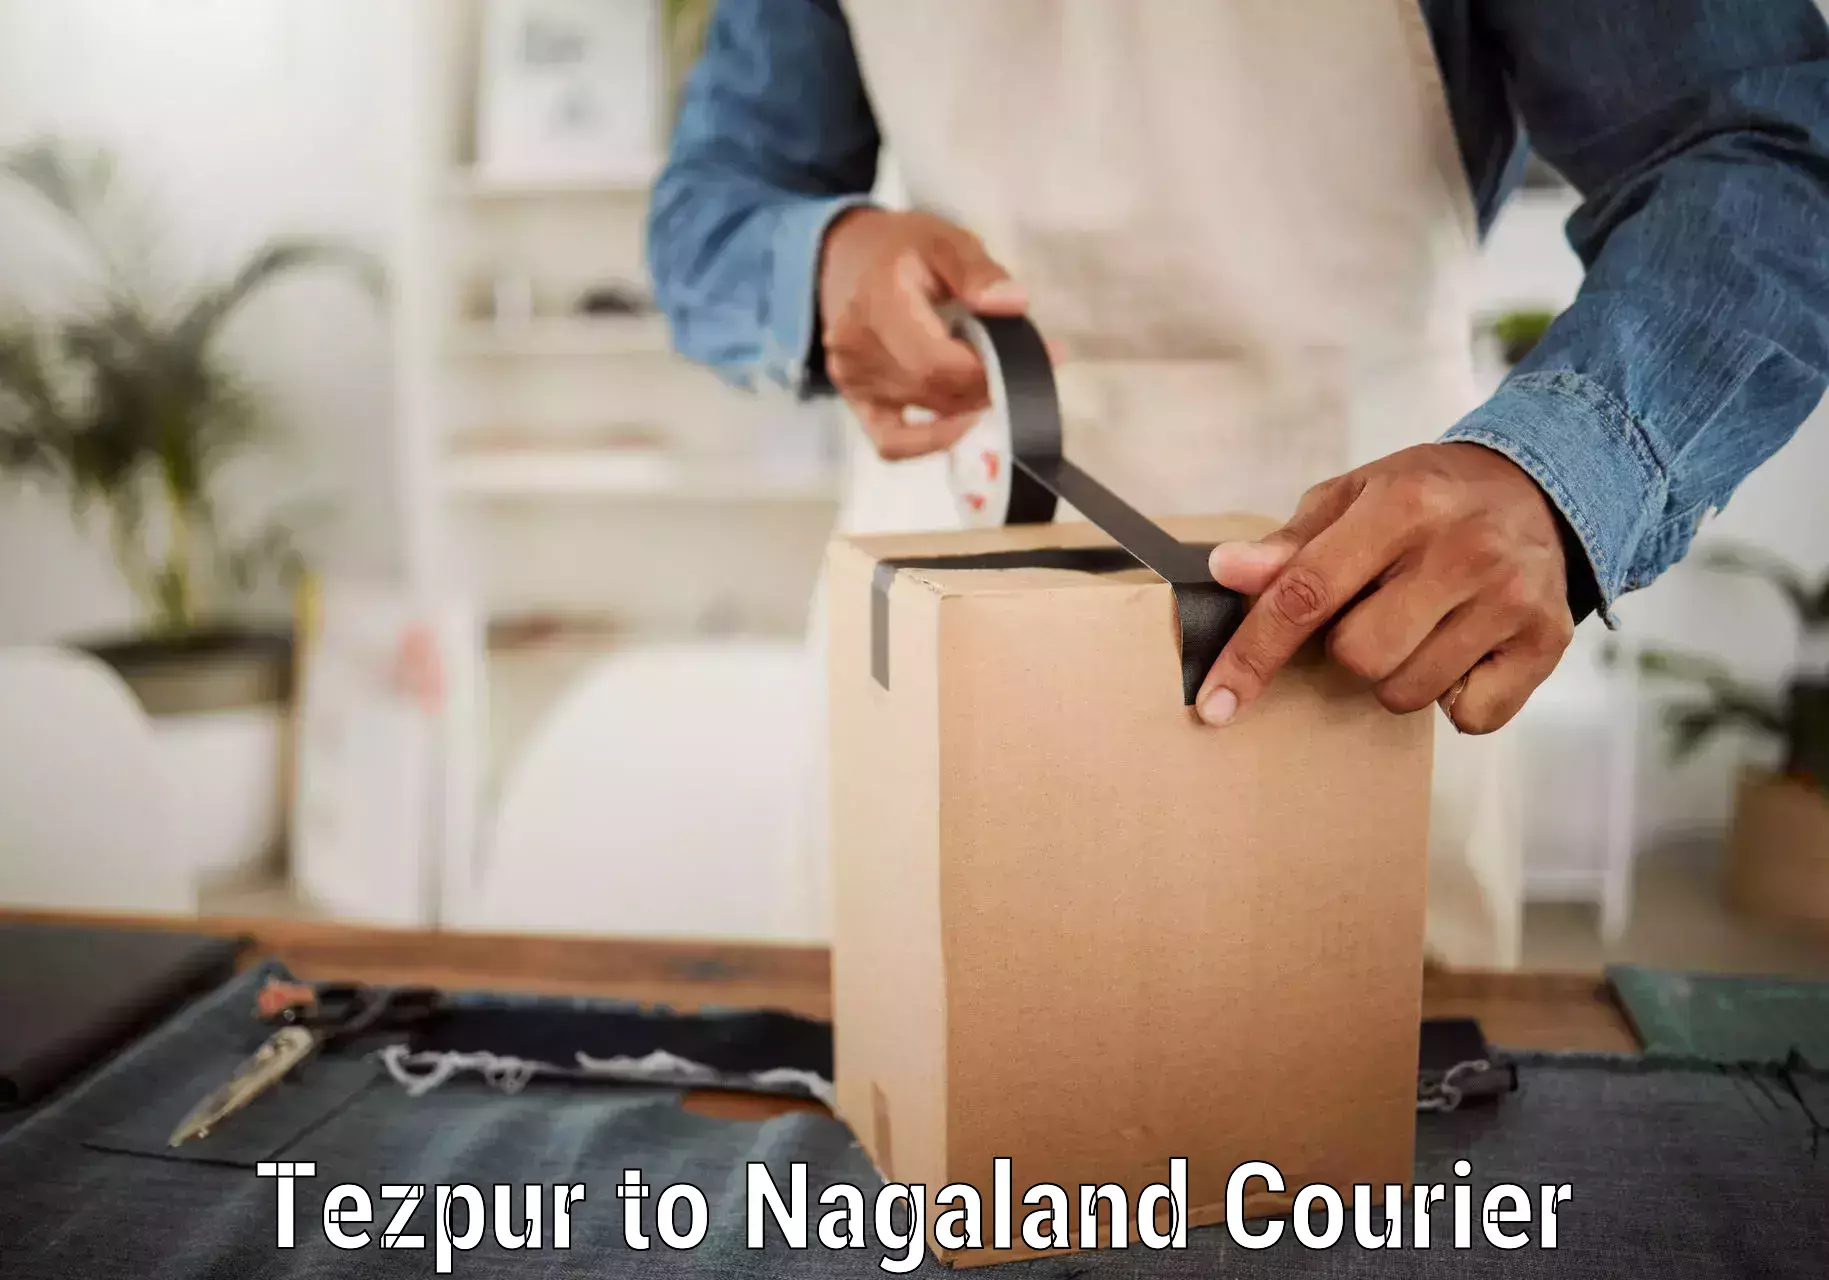 Corporate courier solutions Tezpur to Dimapur